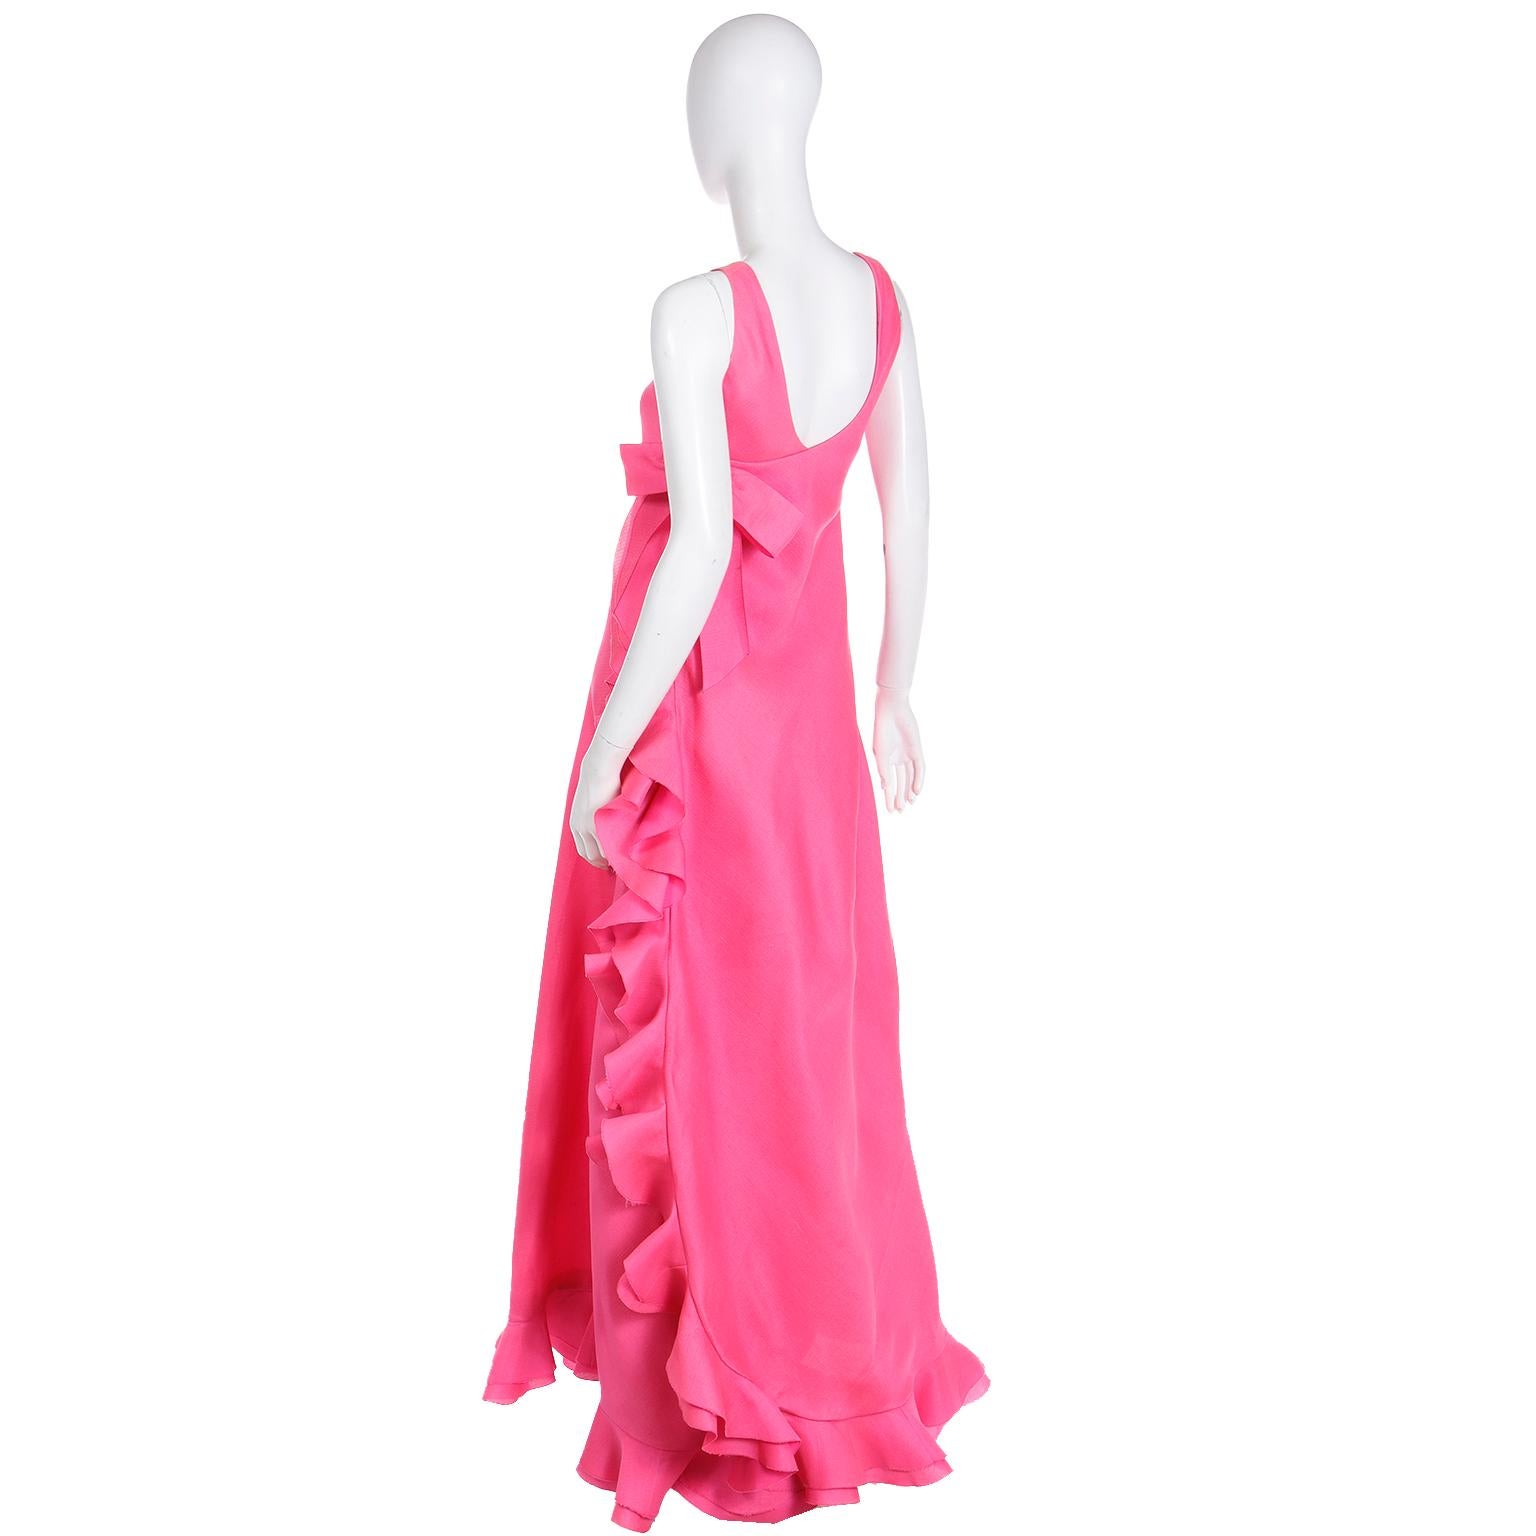 1971 Christian Dior Haute Couture Pink Ruffled Runway Evening Dress Grace Kelly  9